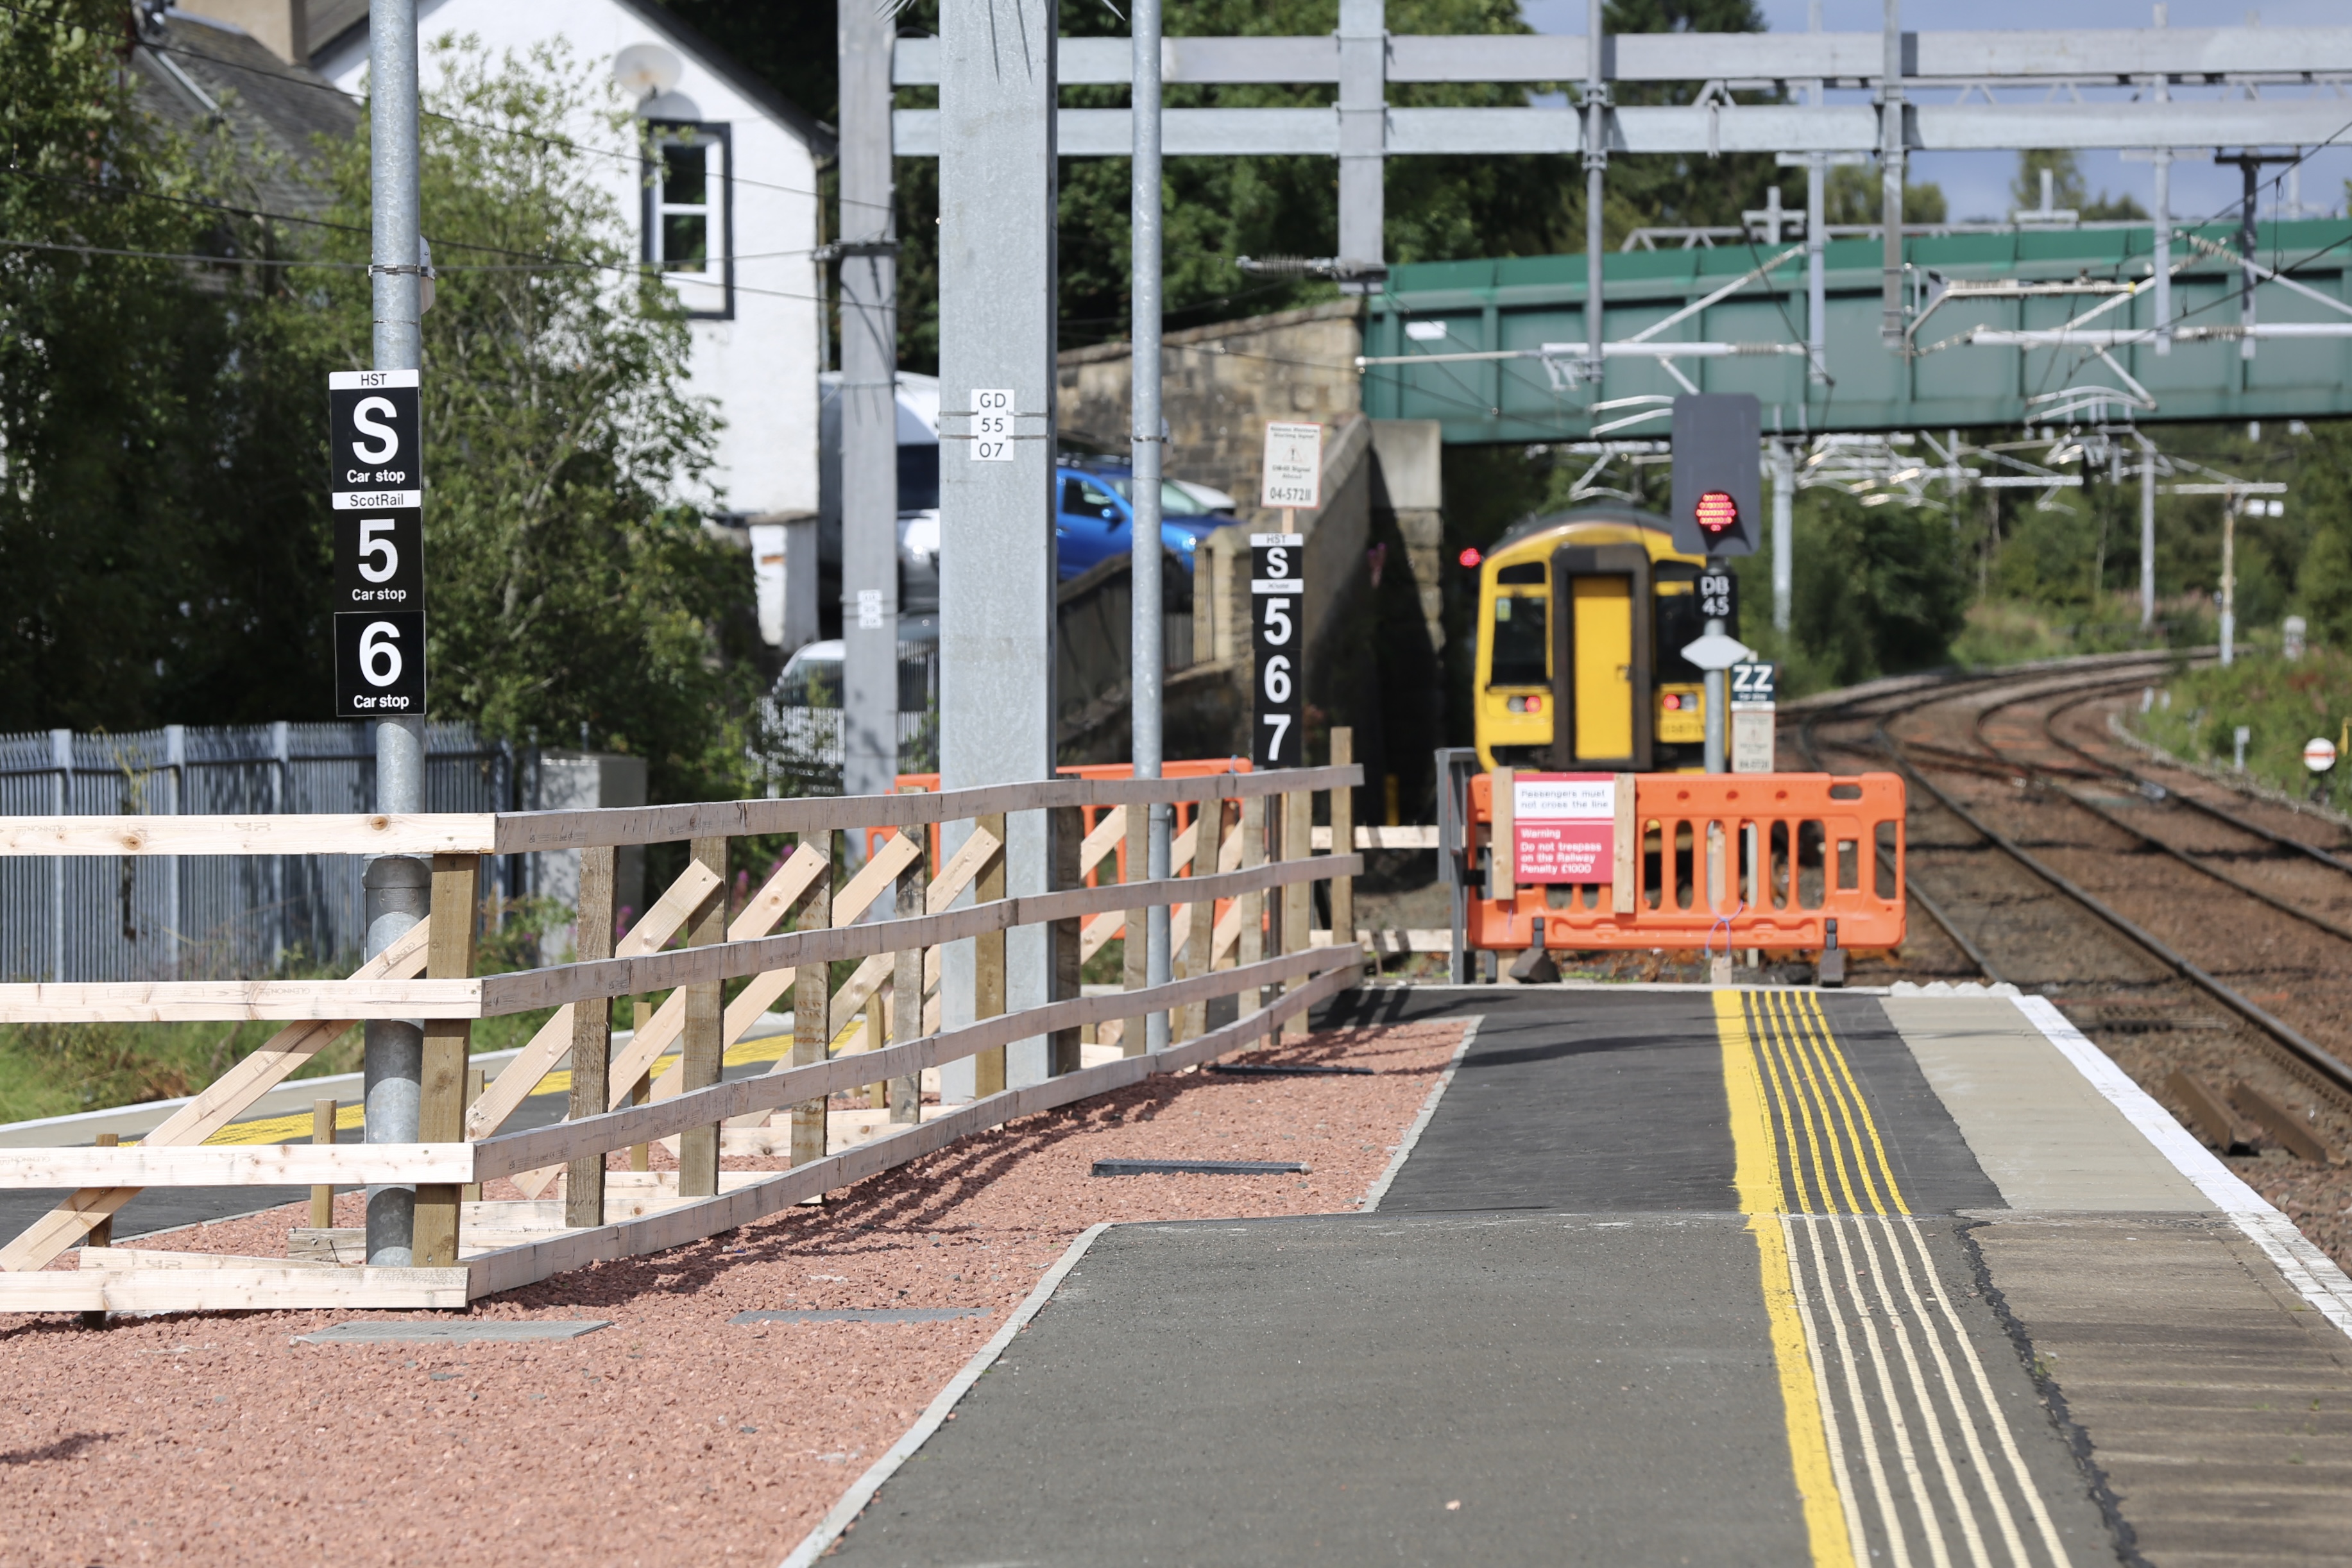 Final phase of railway enhancement work begins at Dunblane station